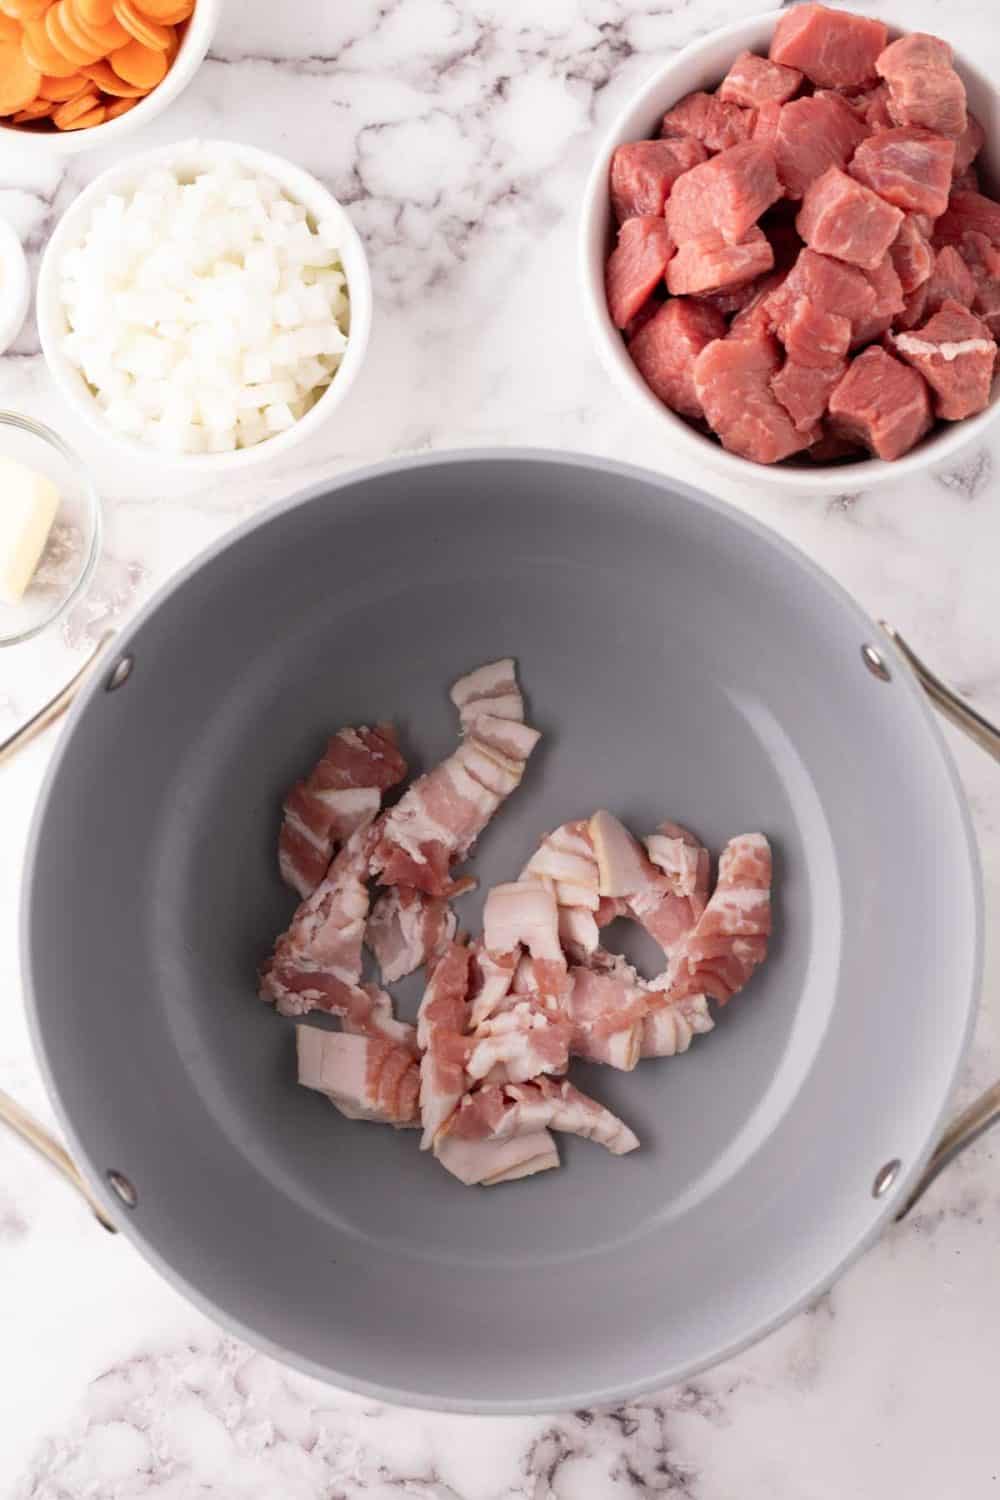 pan with bacon and other raw ingredients forBeef Bourguignon Recipe.